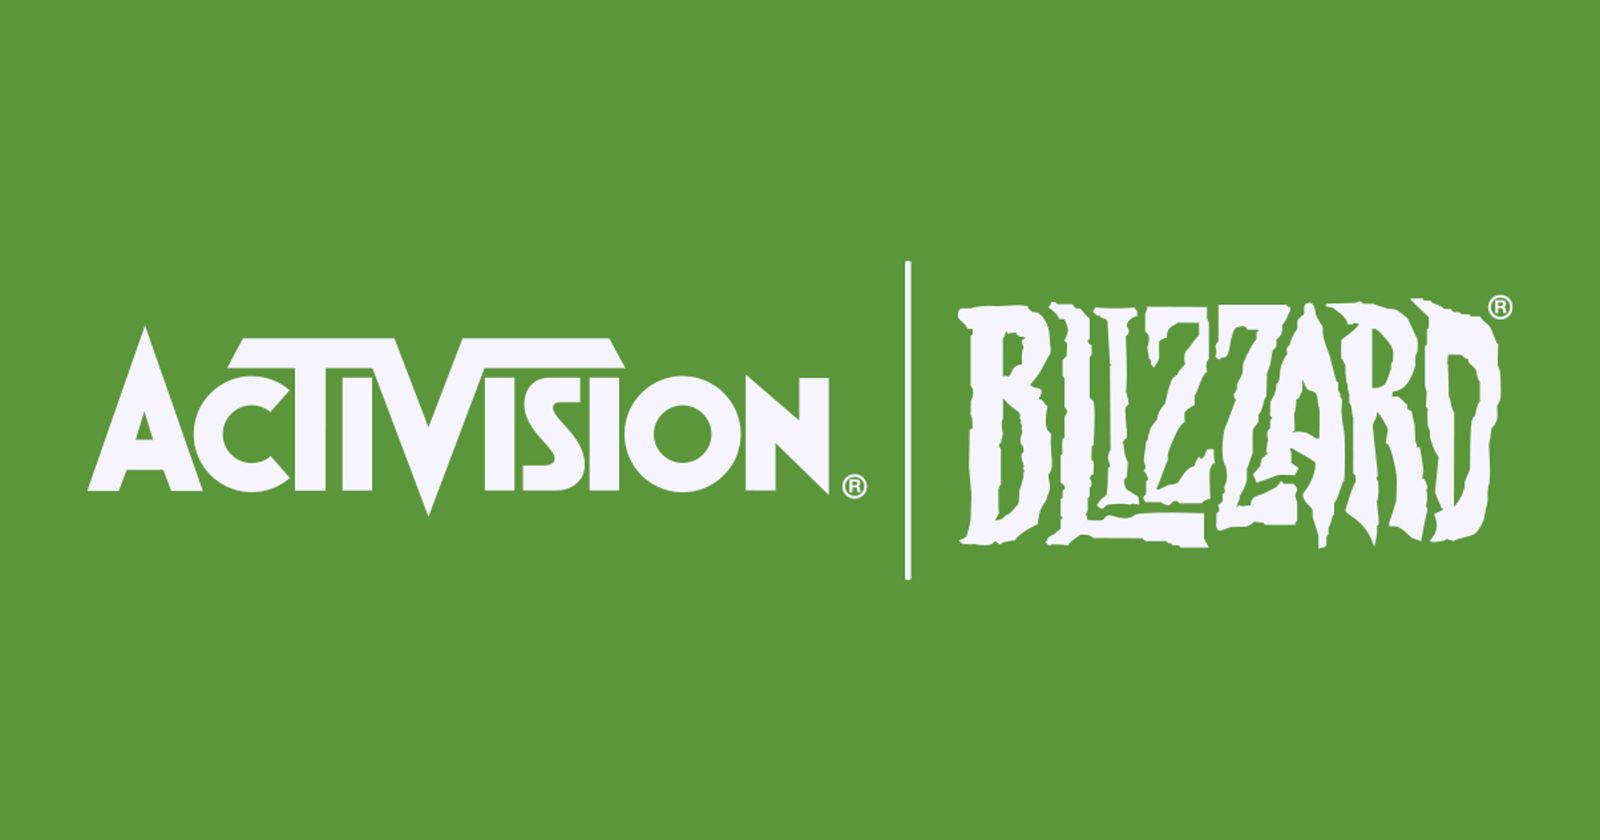 Microsoft's Acquisition of Activision Blizzard Will Reportedly be